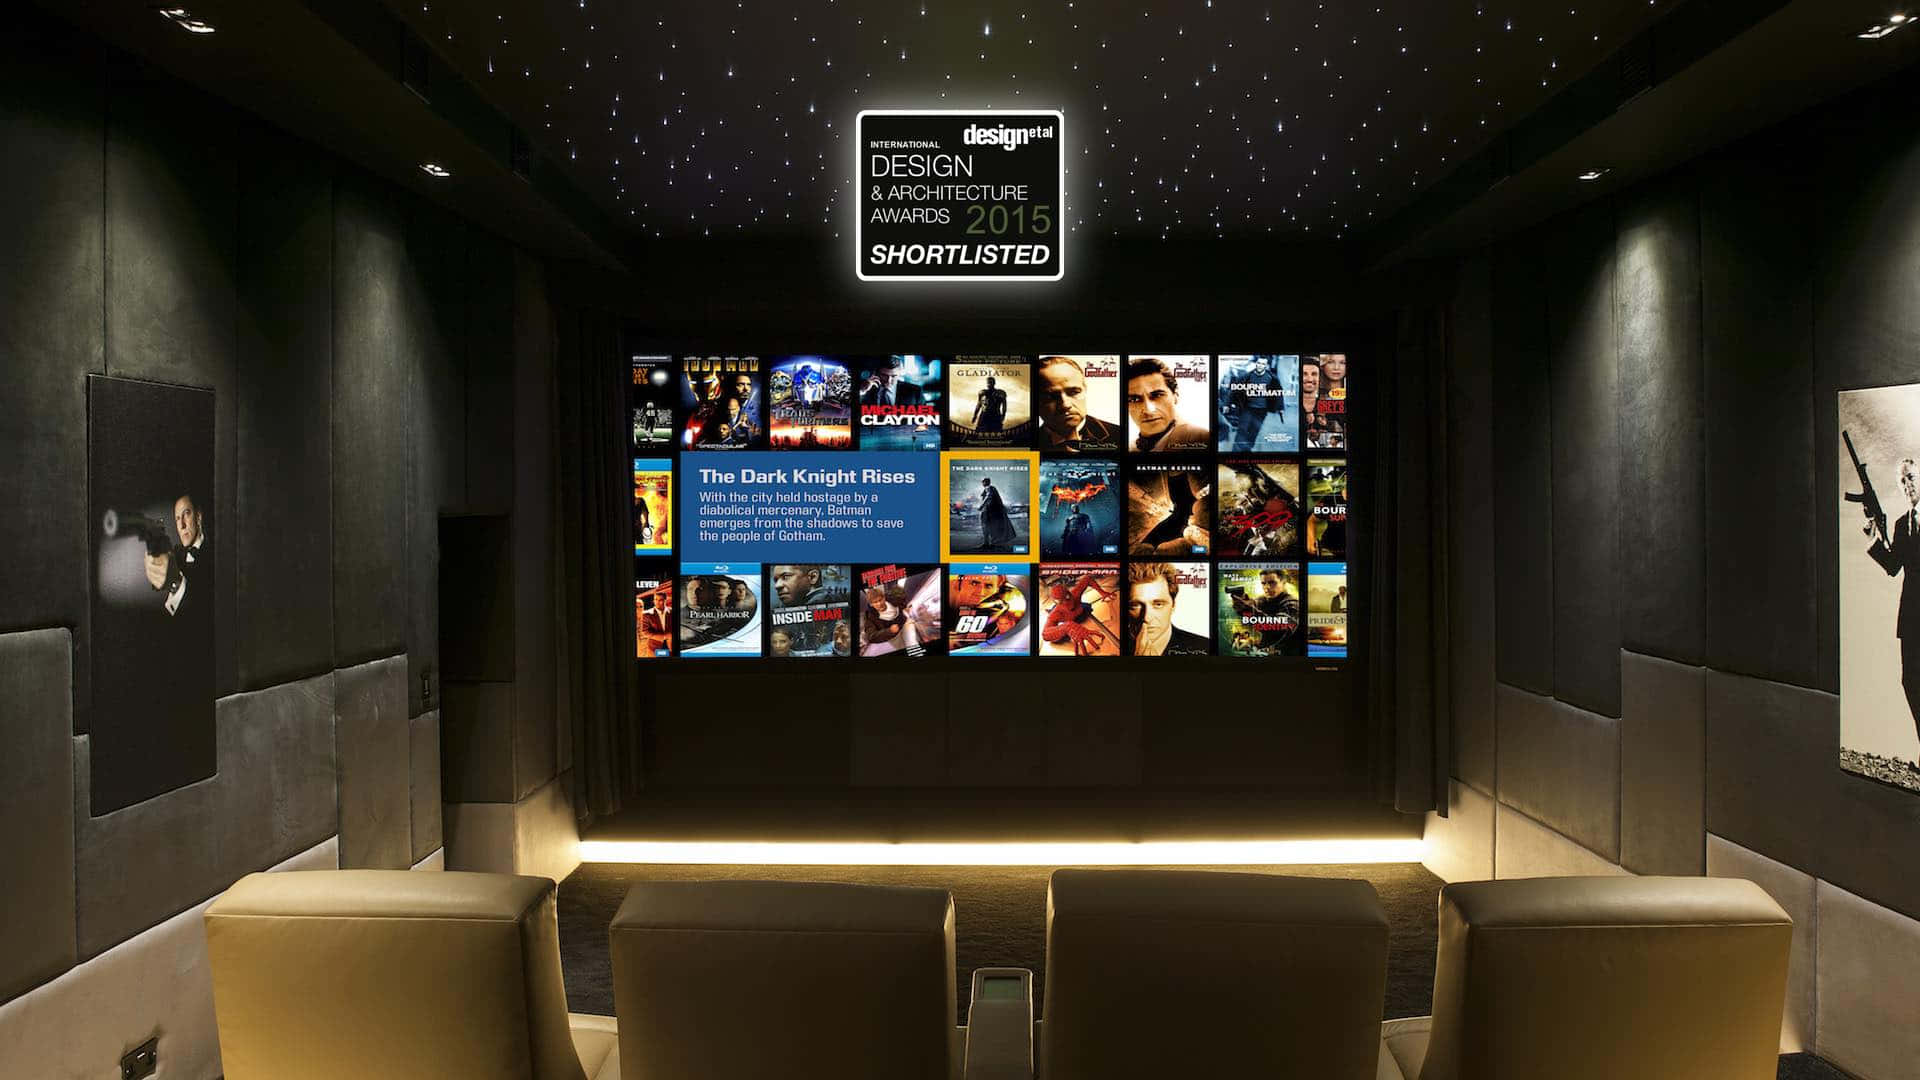 Enjoy home movie night in style with a state-of-the-art home cinema setup. Wallpaper